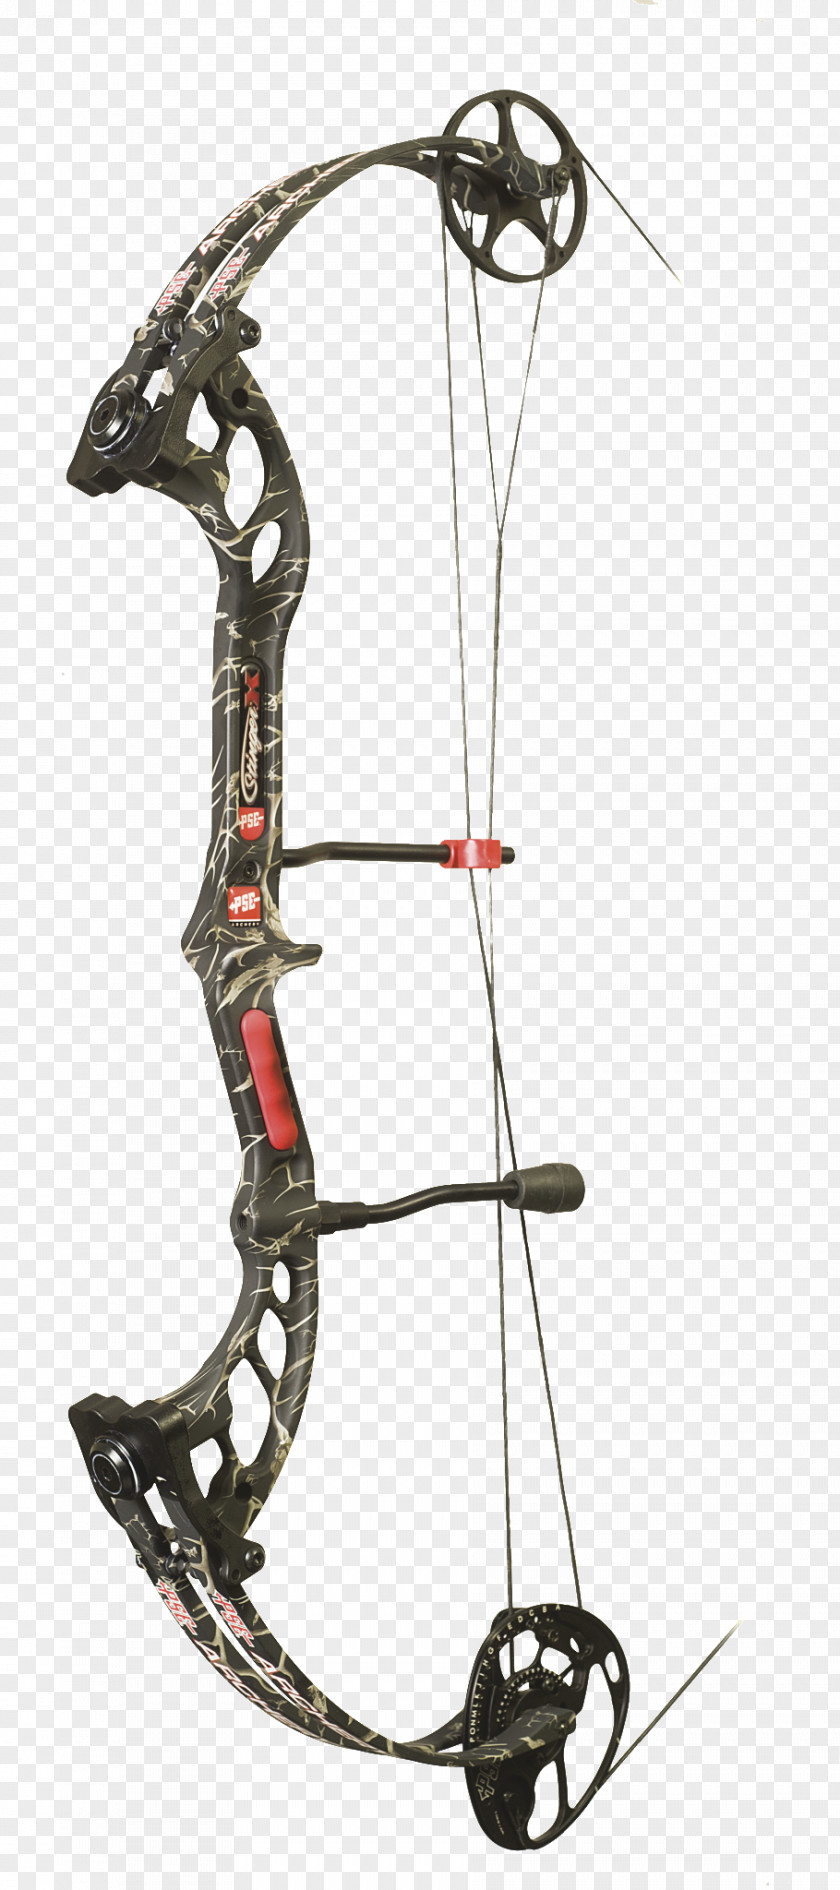 Archery PSE Compound Bows Hunting Bow And Arrow PNG